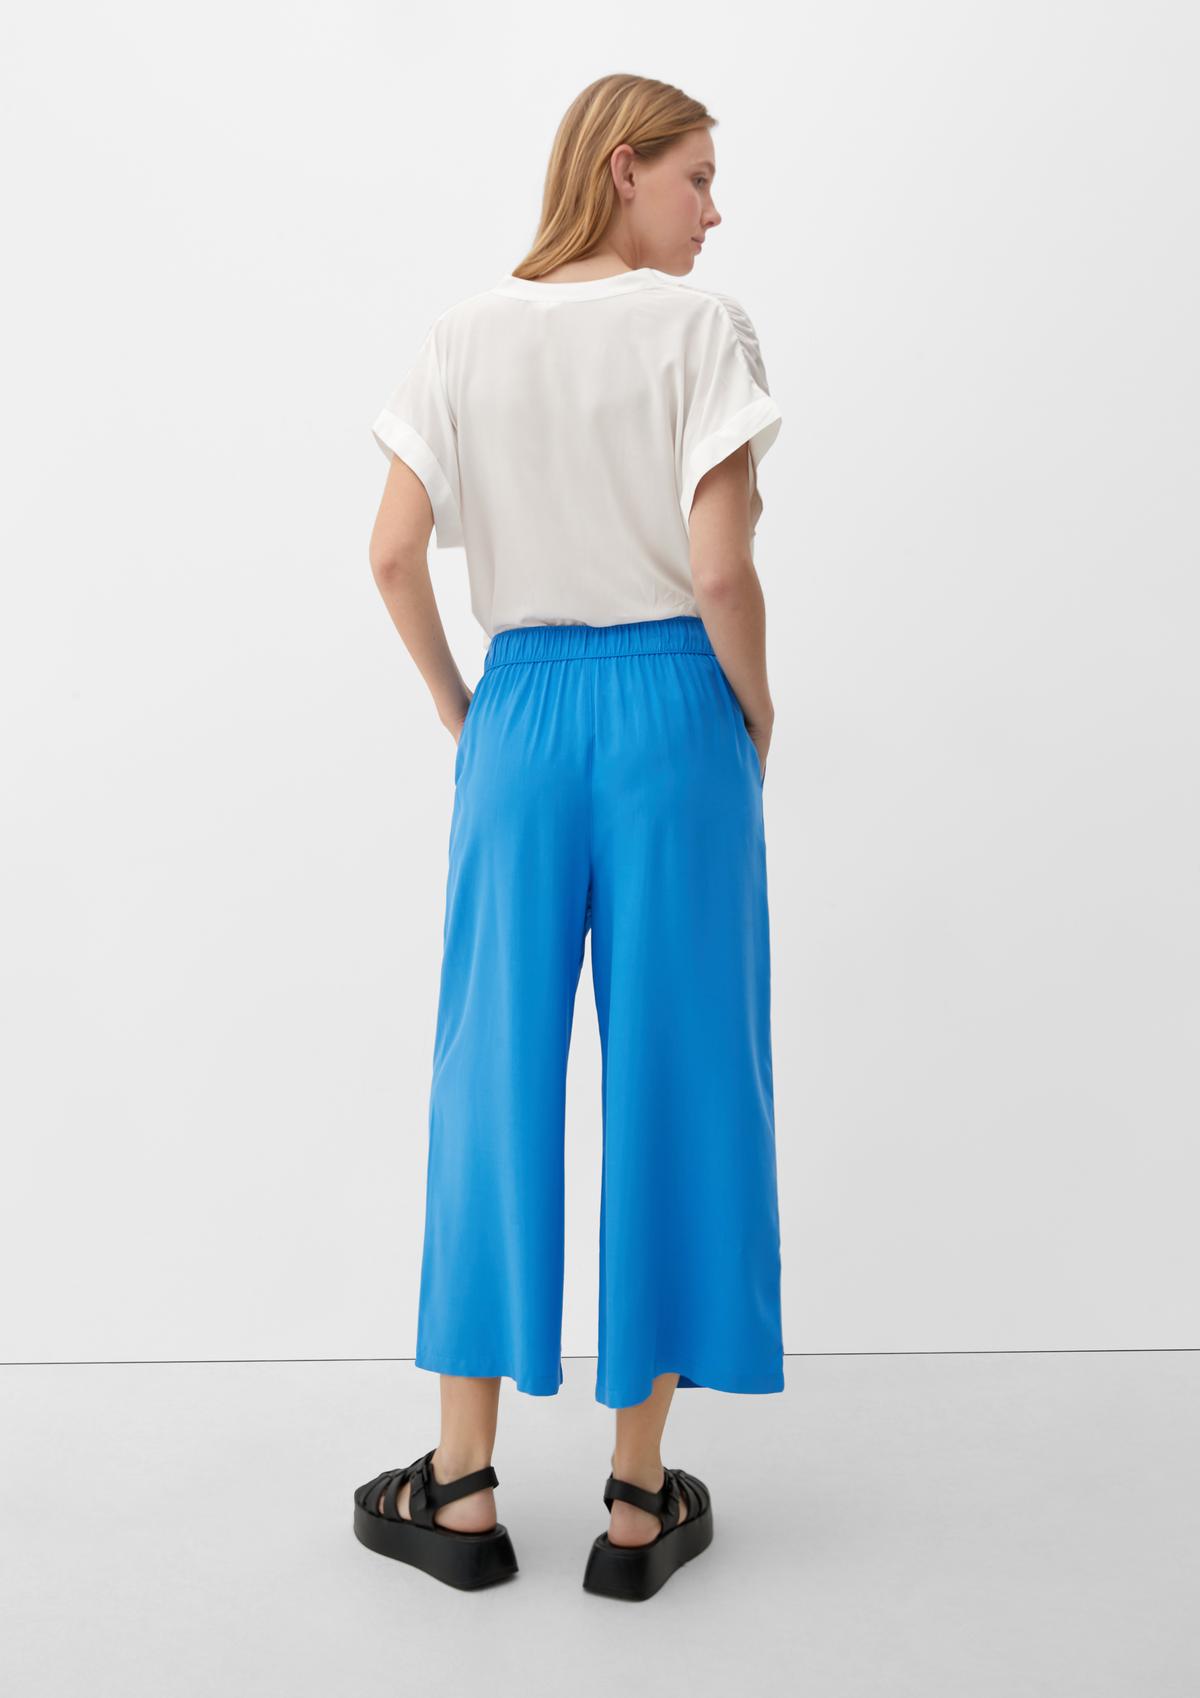 s.Oliver Culottes: trousers with a wide leg